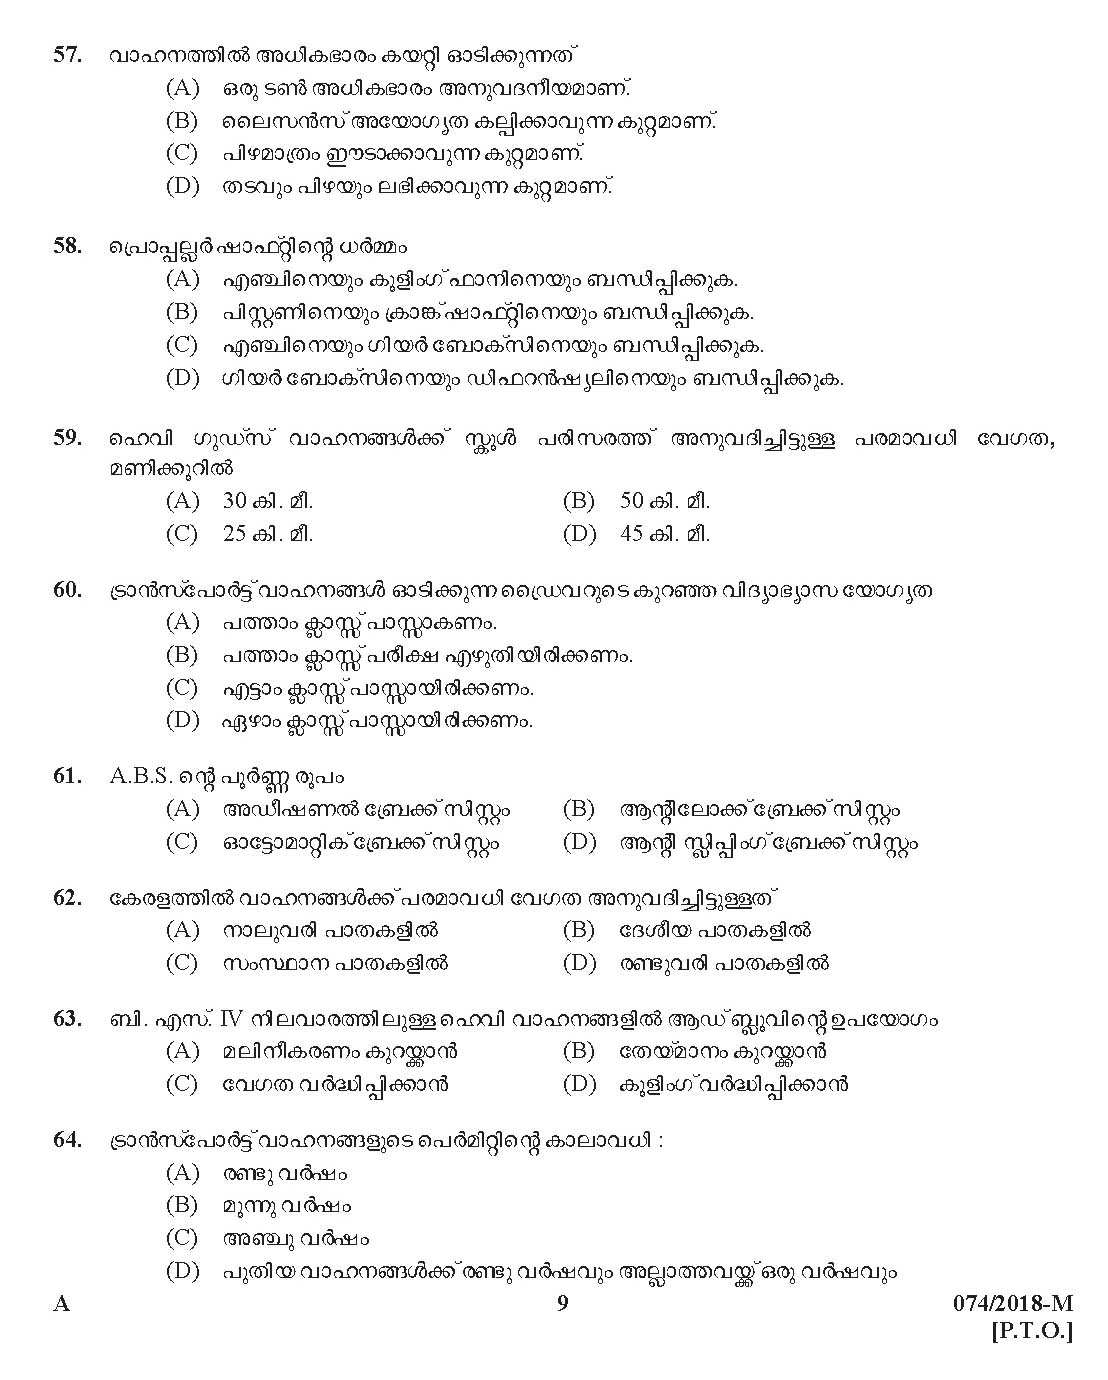 Kerala PSC Police Constable Driver Exam 2018 Question Paper Code 0742018 M 8